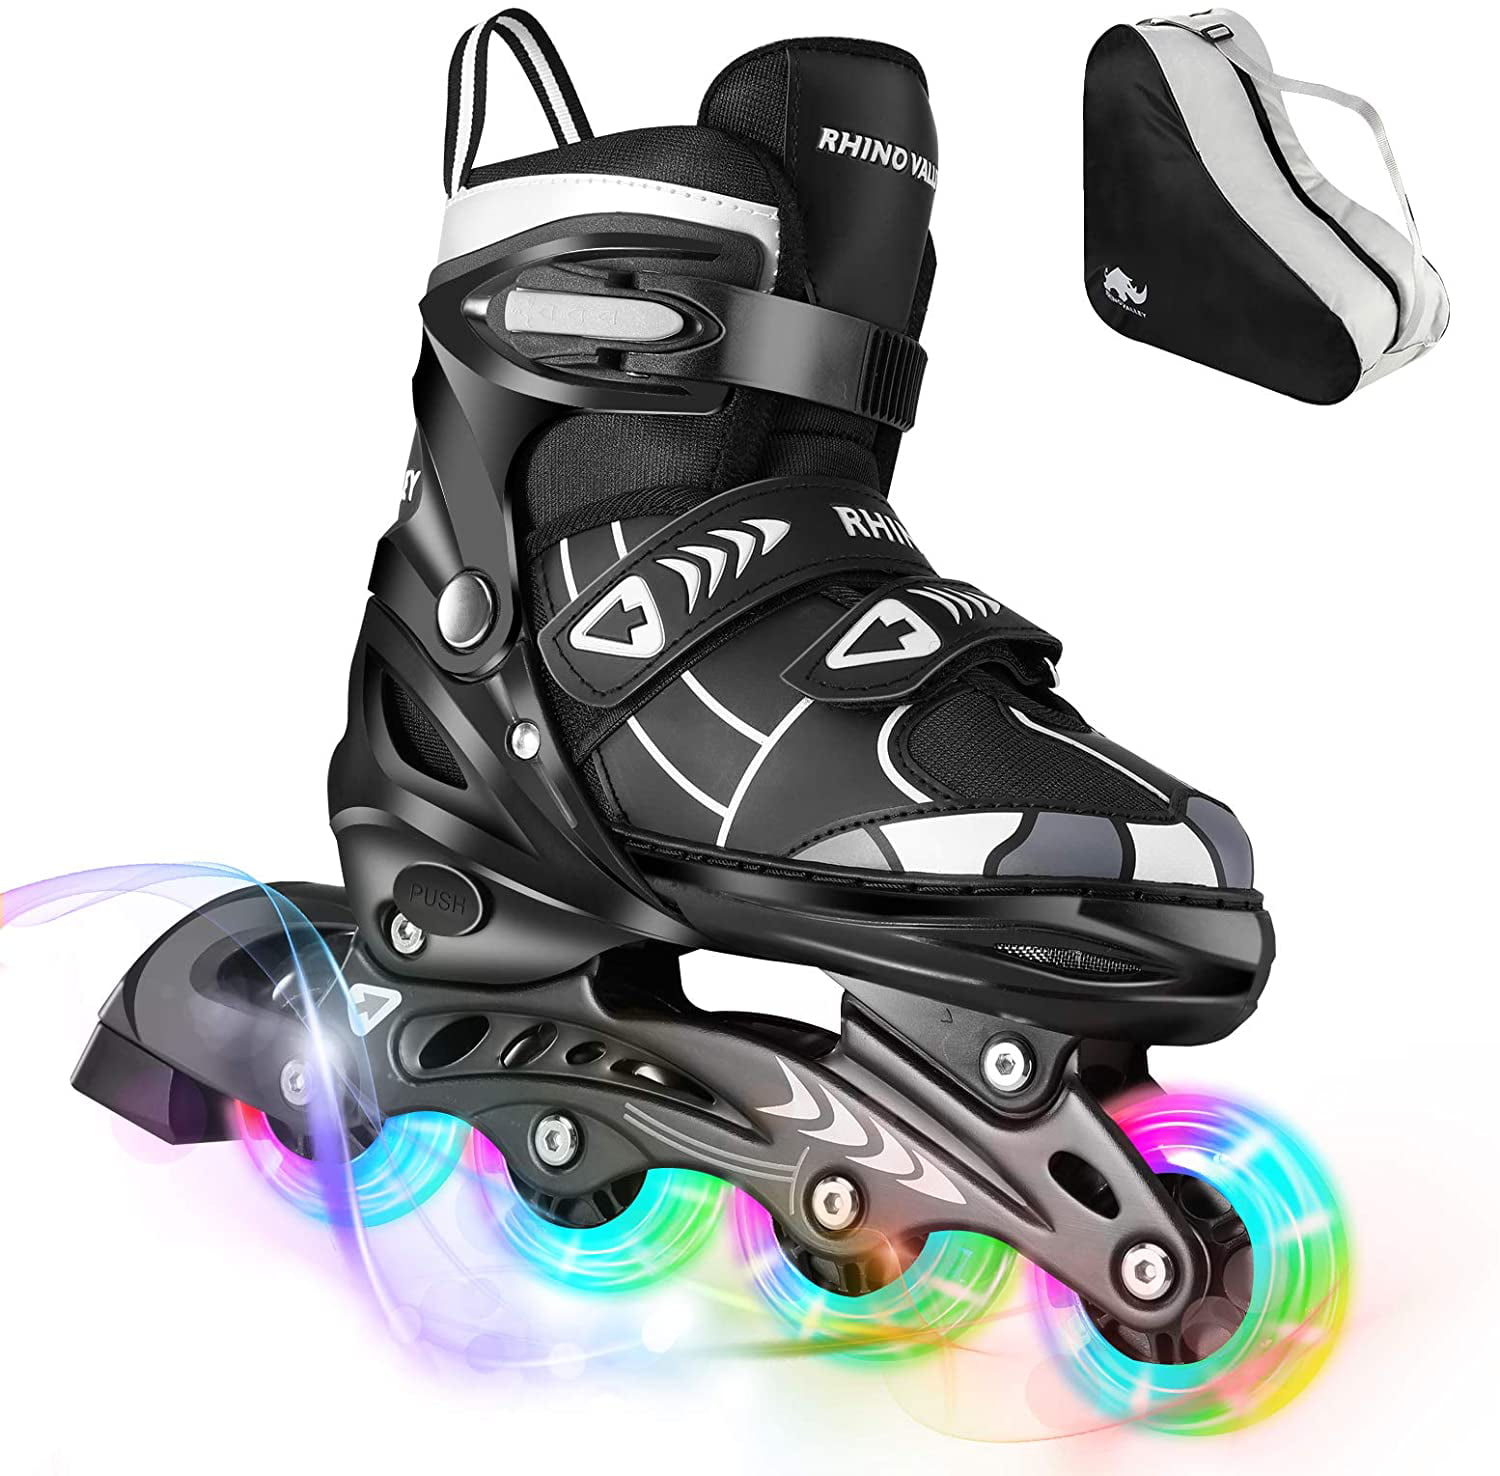 Roller Skates with Featuring All Illuminating Wheels ITurnGlow Adjustable Inline Skates for Kids and Adults Men and Ladies for Girls and Boys 